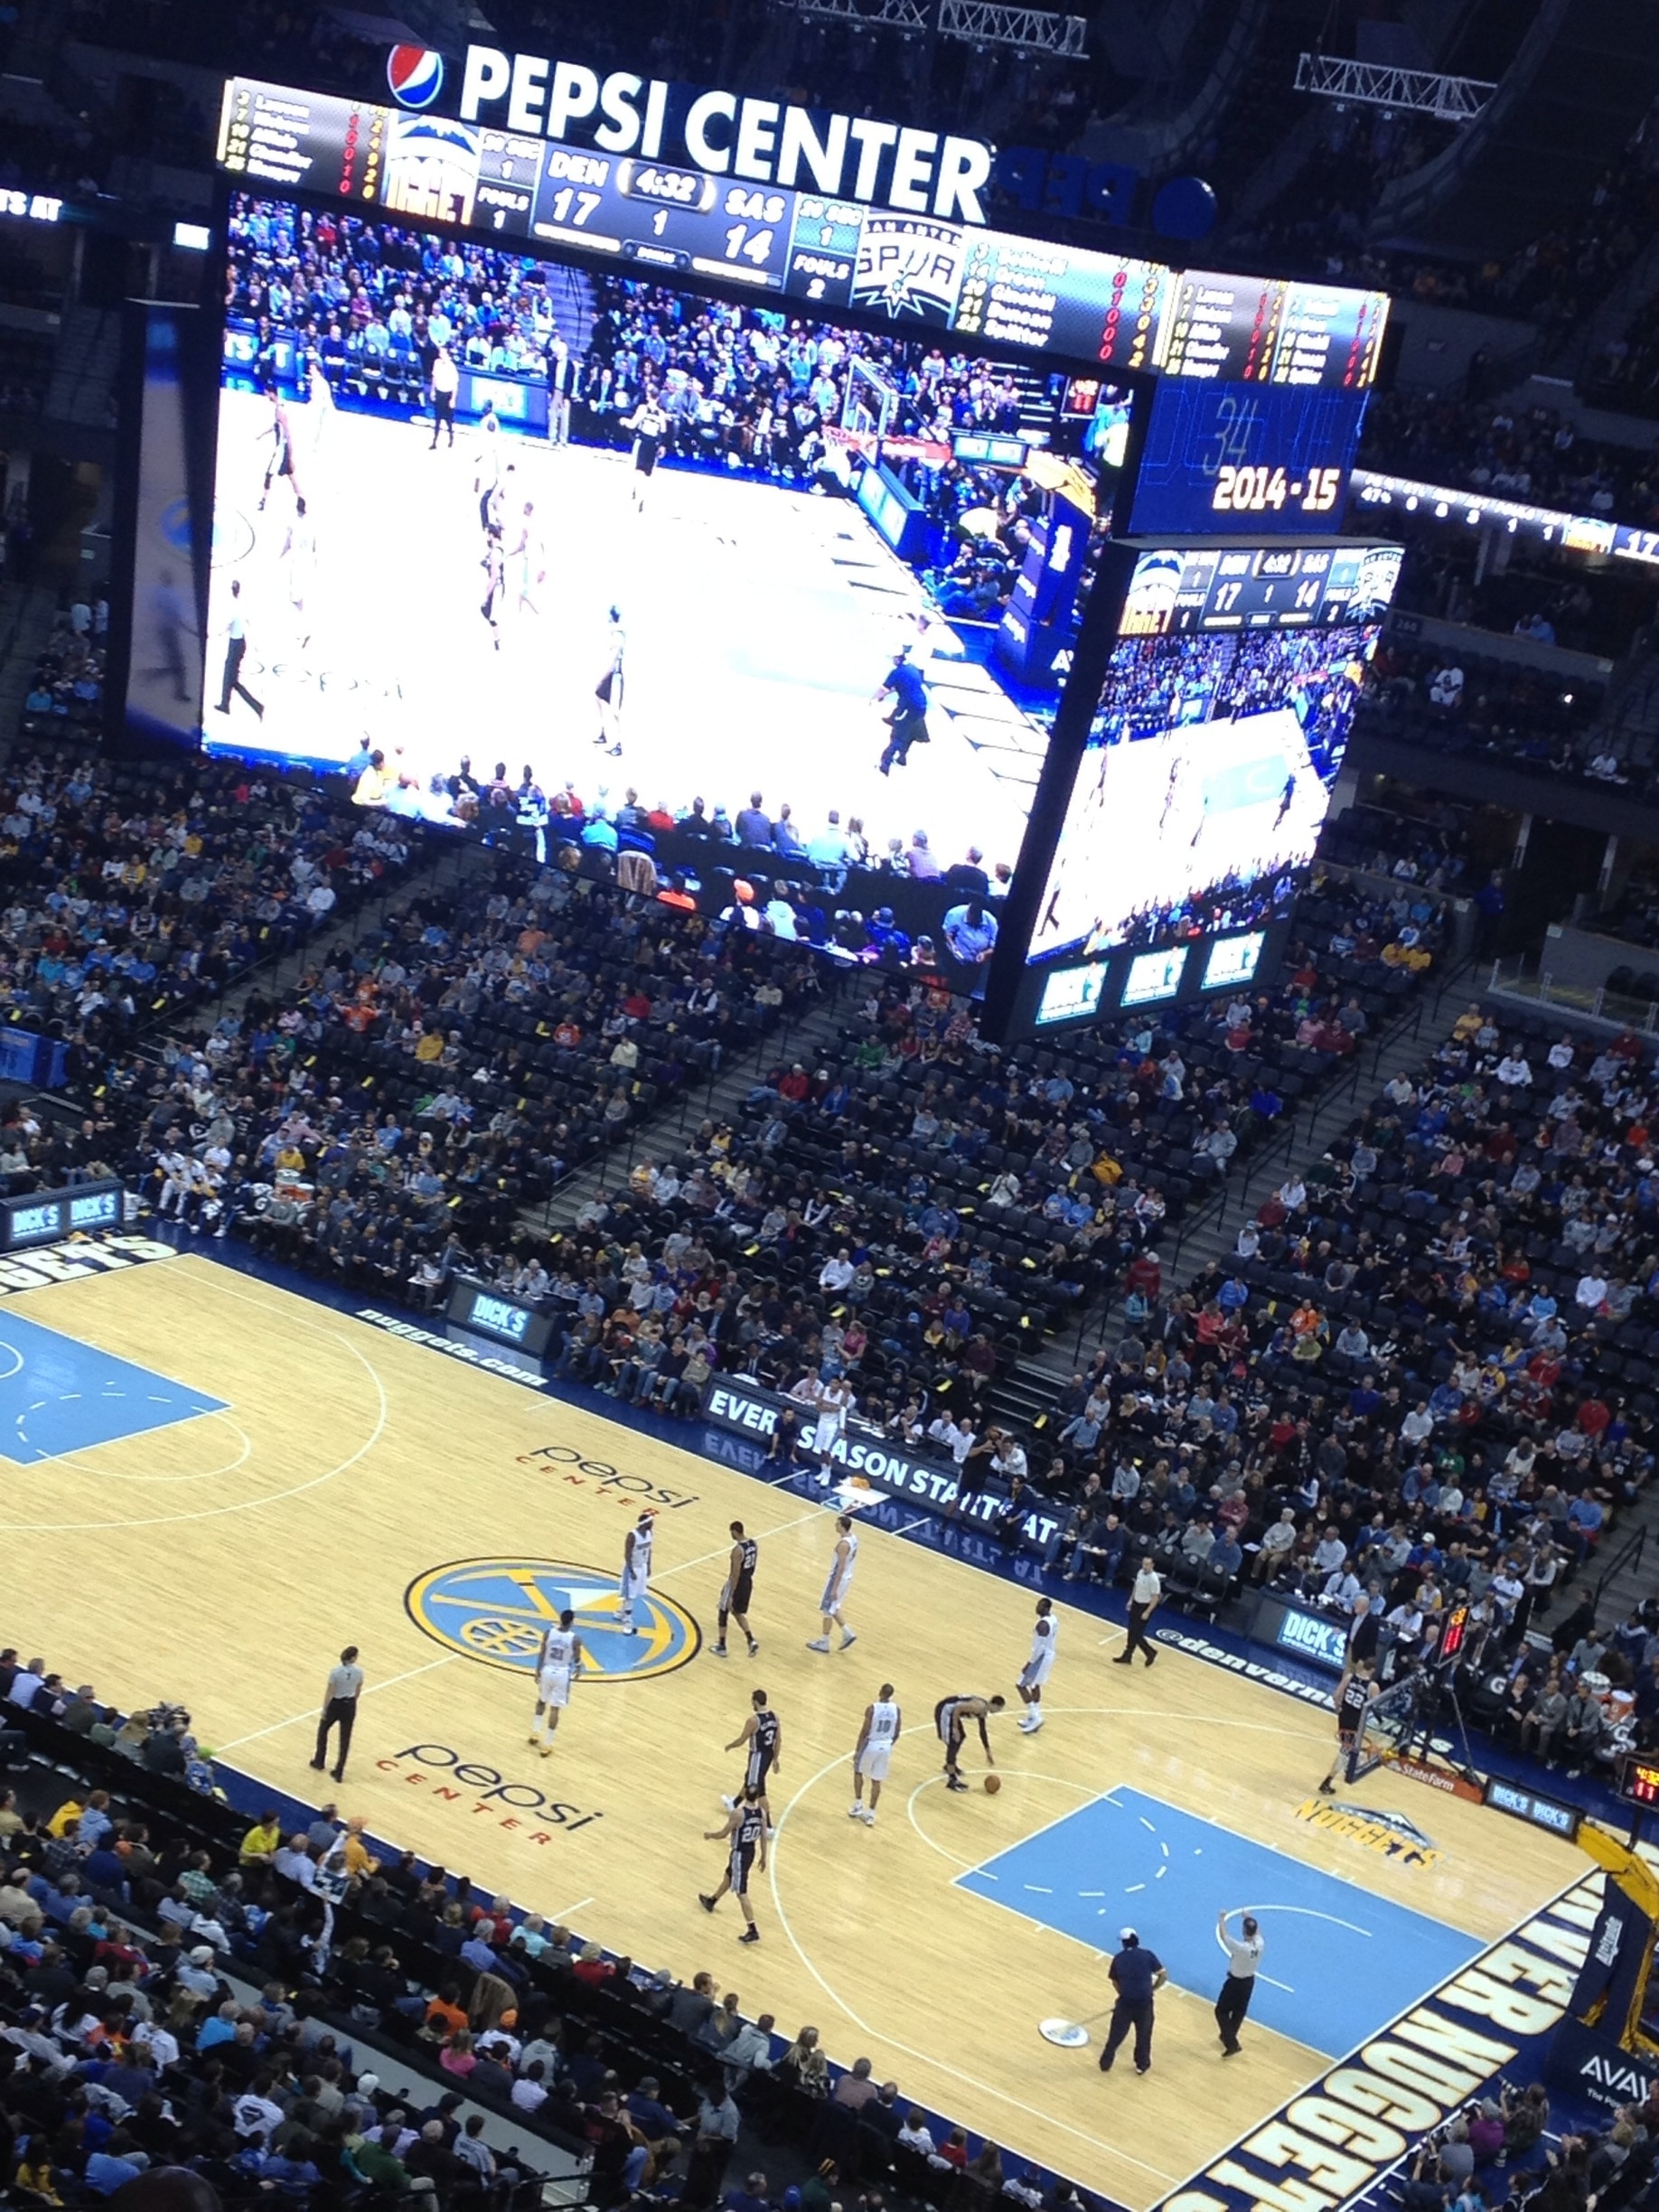 Nuggets vs Spurs. Go Spurs Go!!!! This one was one of my best nights ever! Too bad I had to watch spurs playing w the nuggets as local! But we still beat them 😉 yeah!